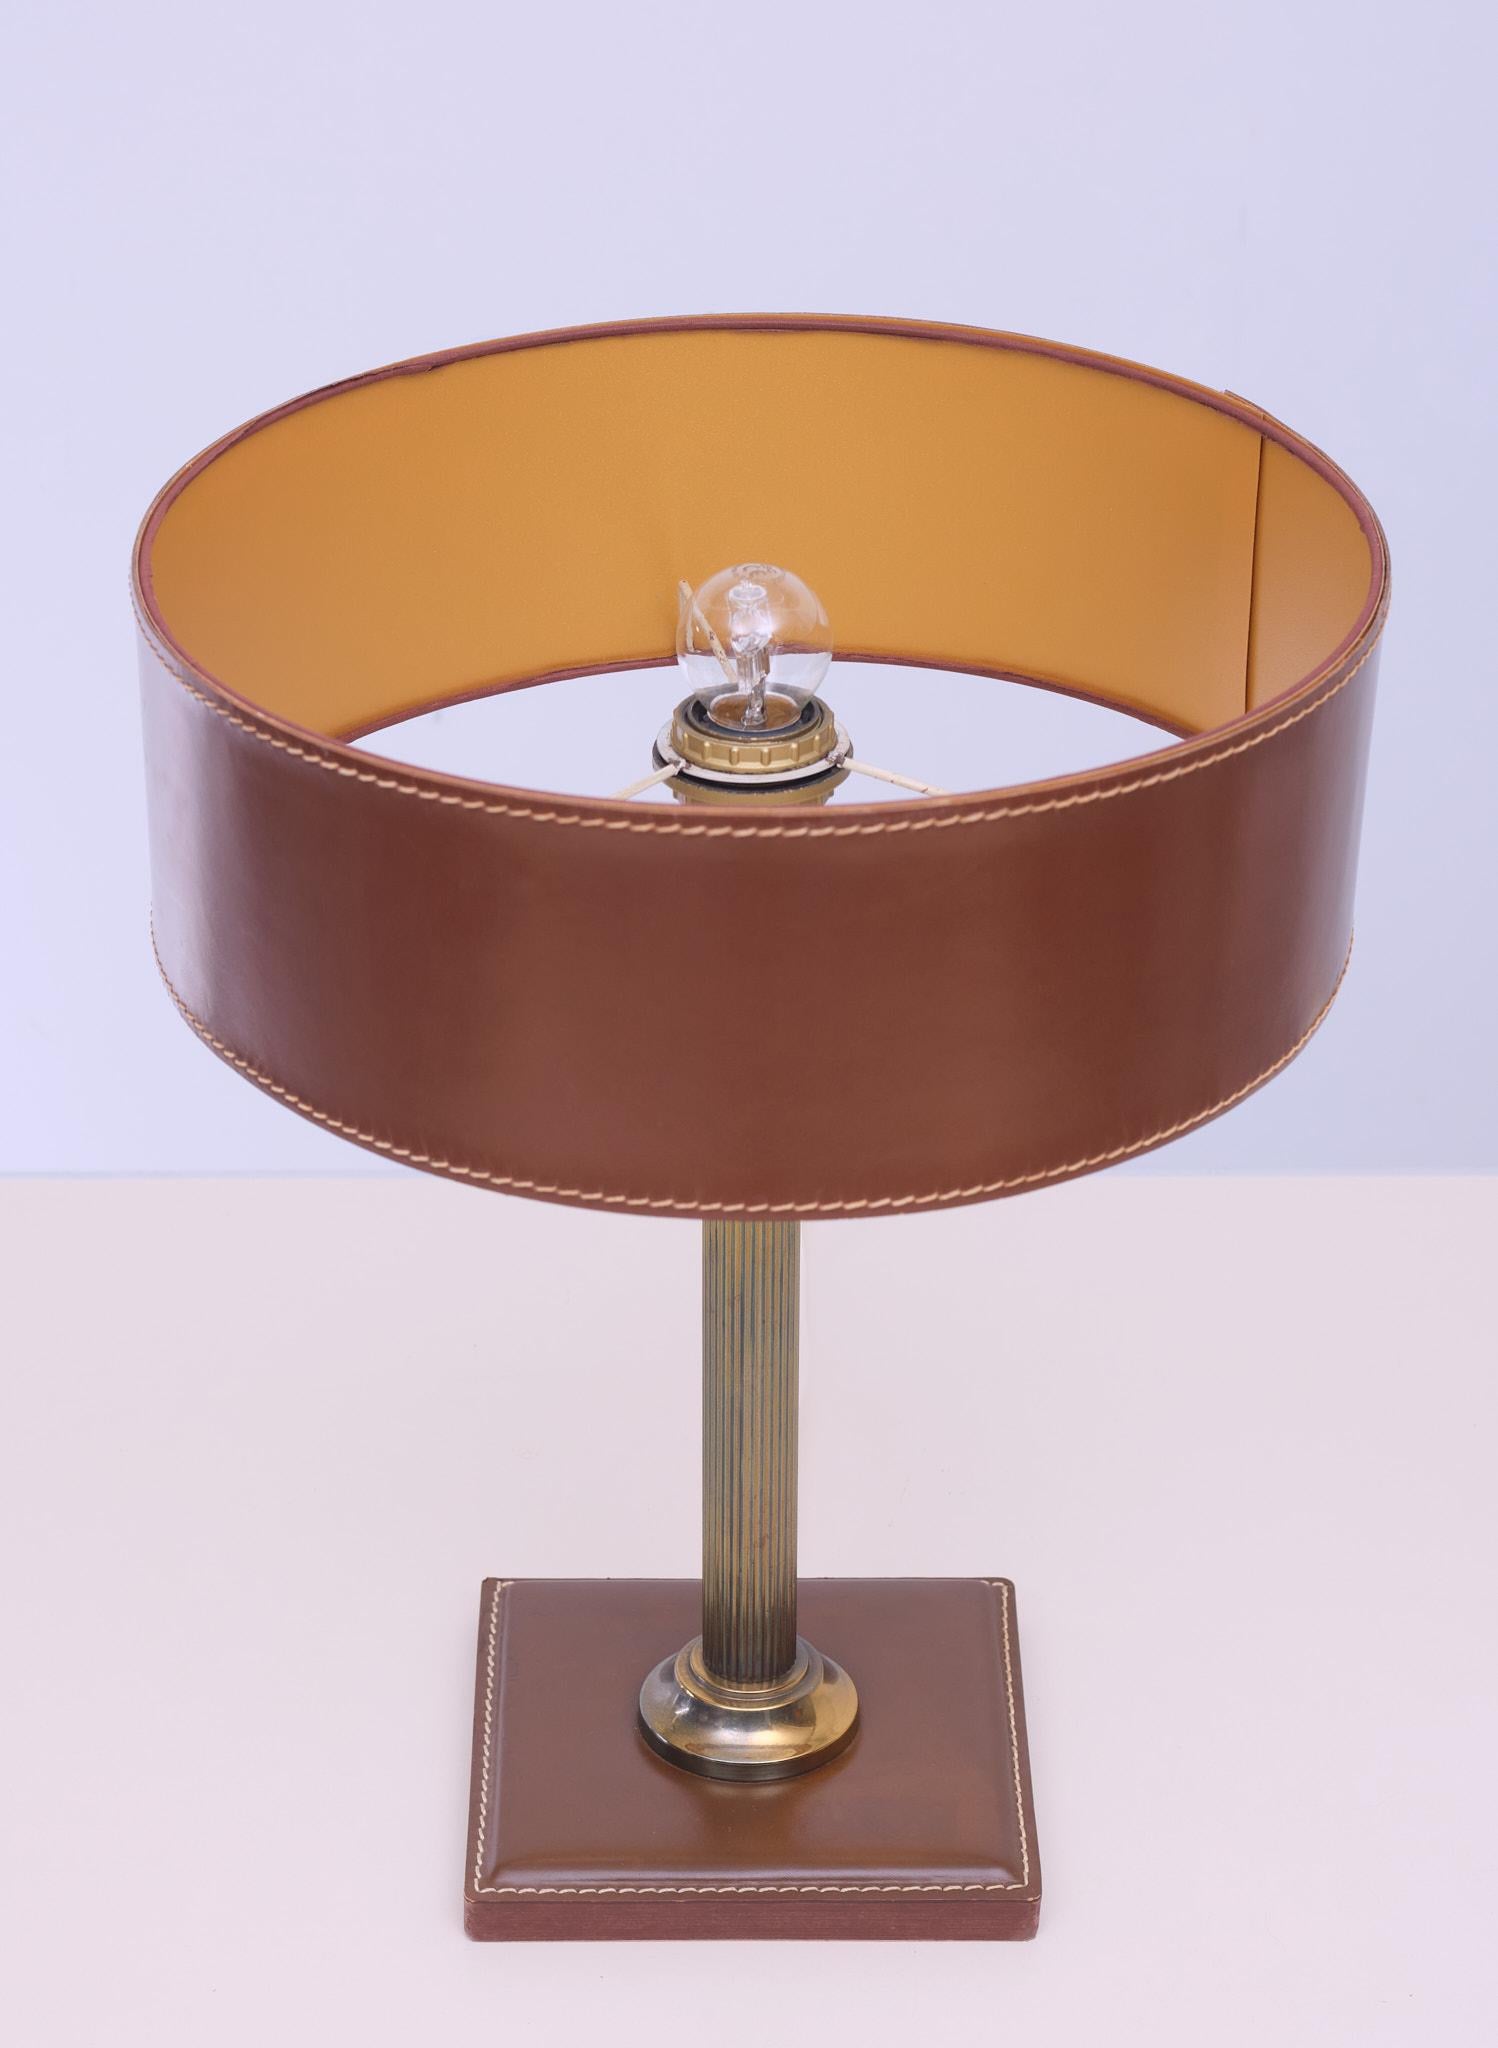 Very nice Stich Leather clad lamp. Attributed to Jacques Adnet 1960s.